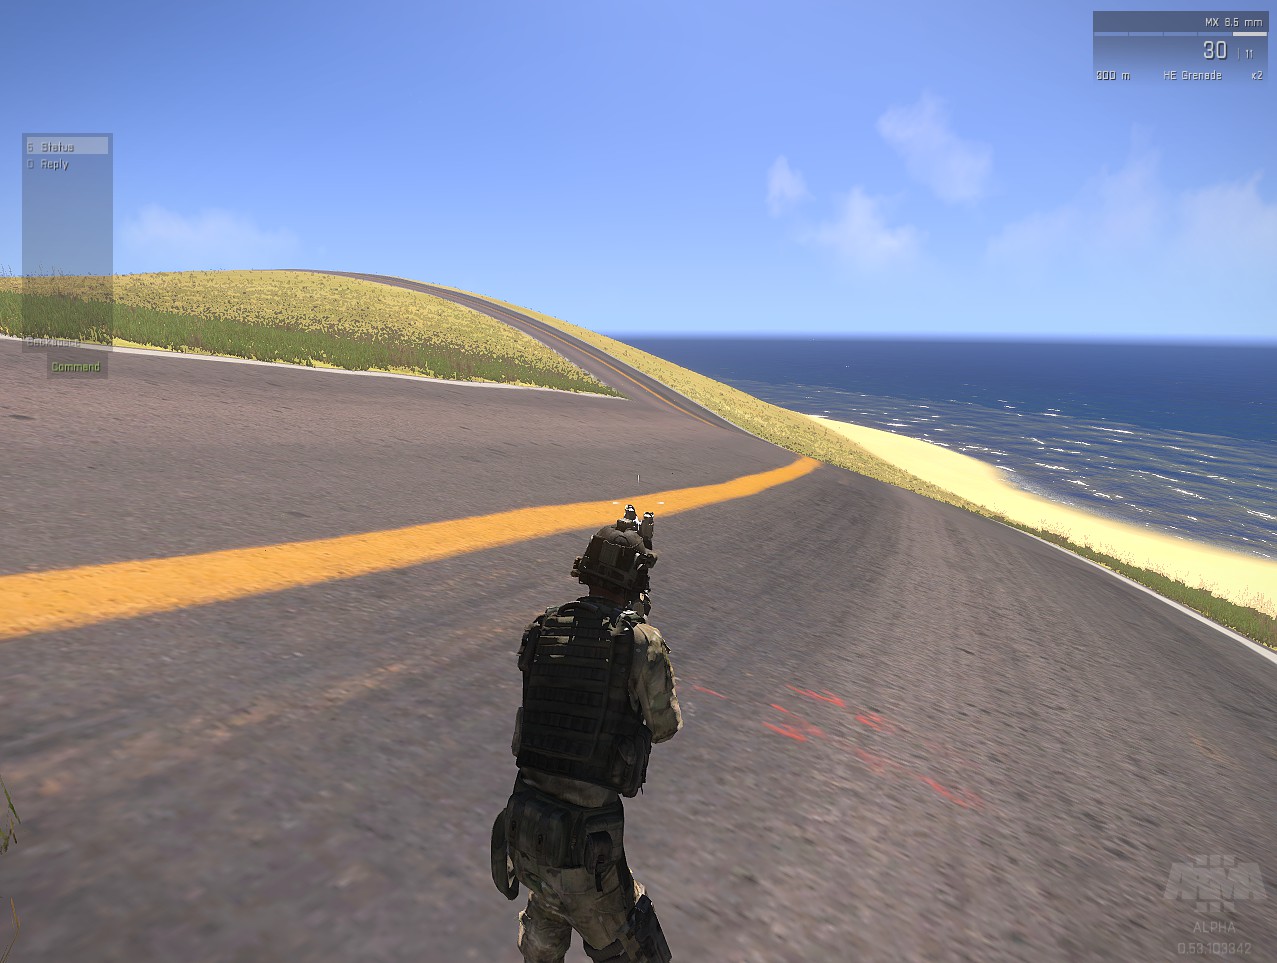 pmc.editing.wiki_images_arma-3-road-shape-file-making-guide-01.jpg